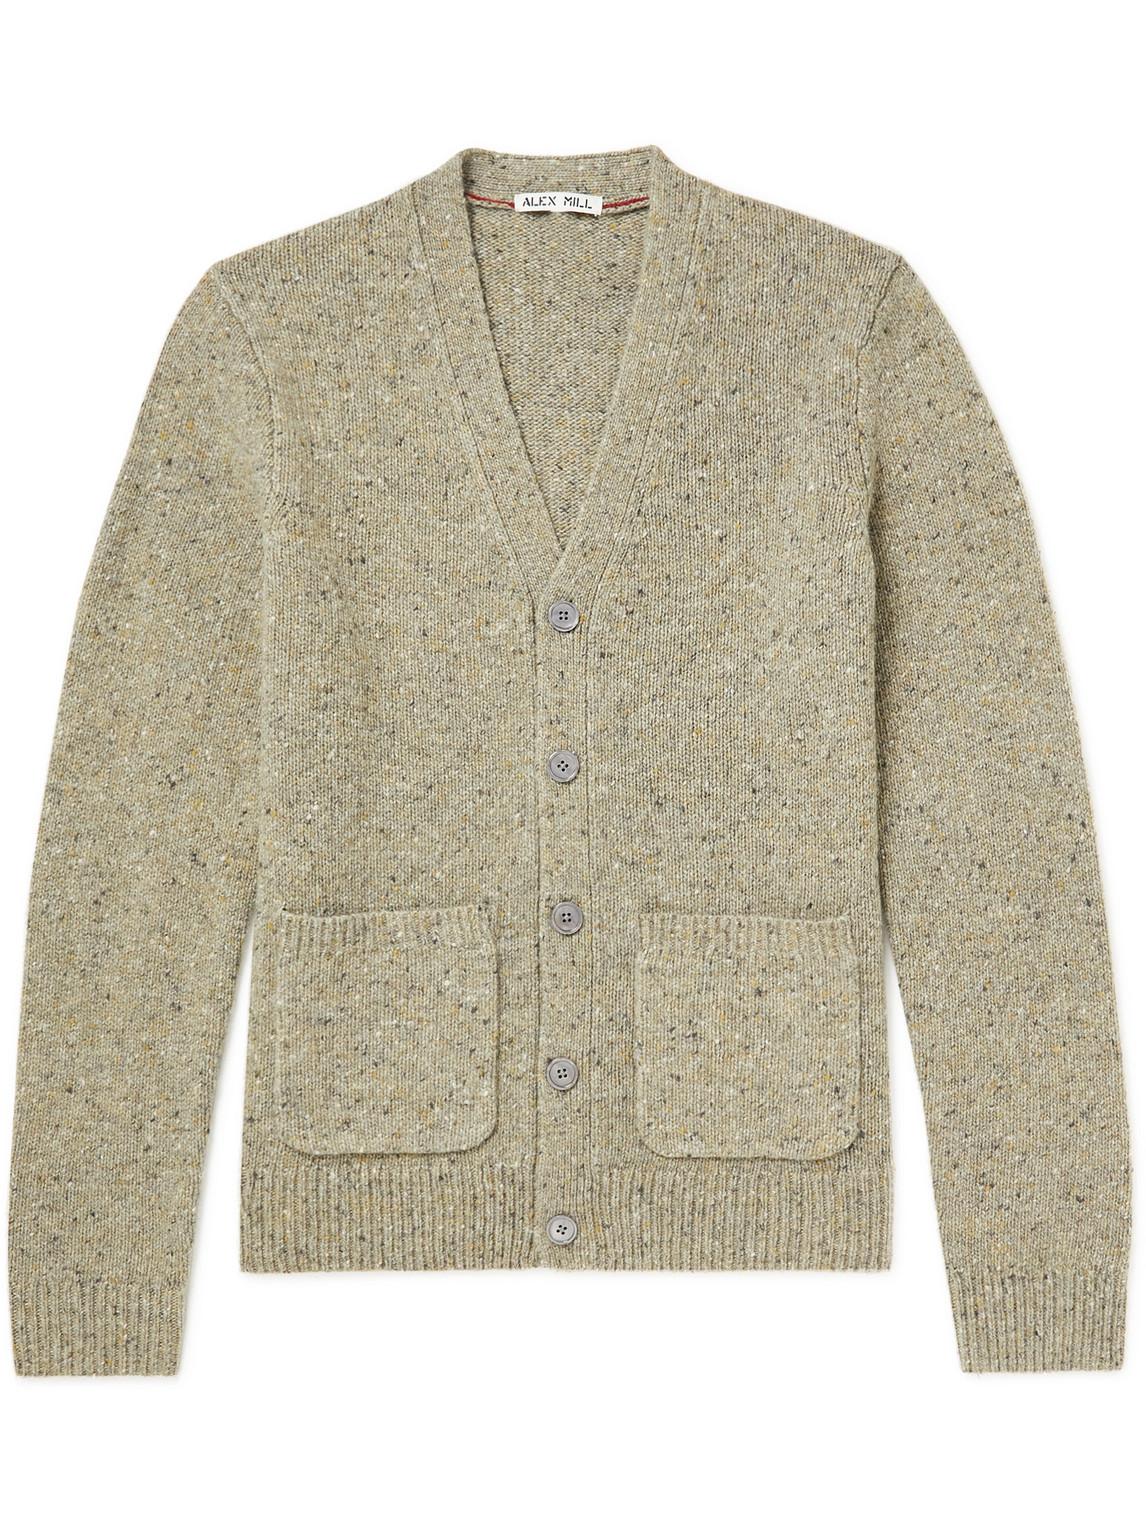 Alex Mill Donegal Merino Wool-blend Cardigan in Natural for Men | Lyst